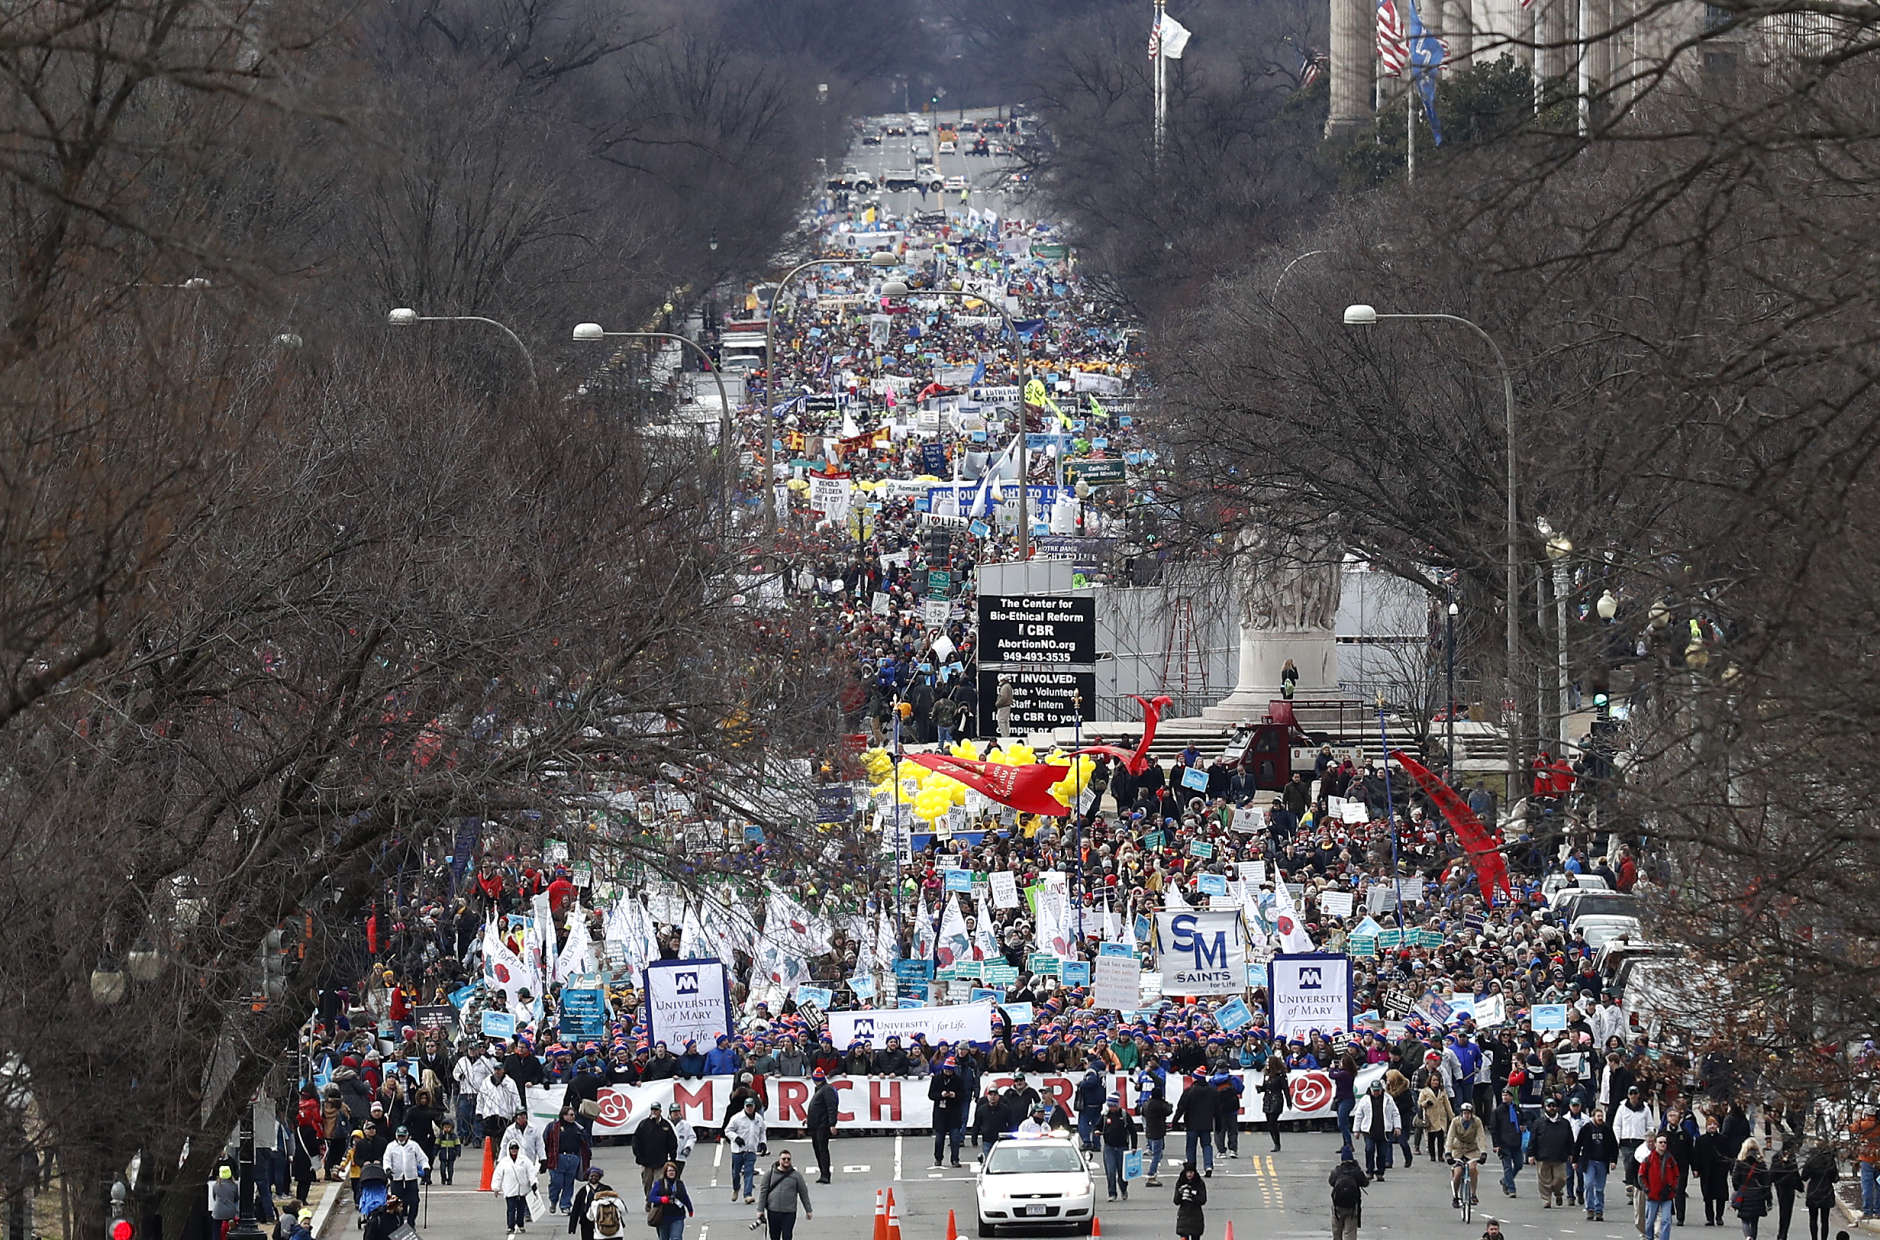 Anti-abortion activists march up Constitution Avenue en route to the Supreme Court in Washington, Friday, Jan. 27, 2017, during the 44th annual March For Life. (AP Photo/Carolyn Kaster)